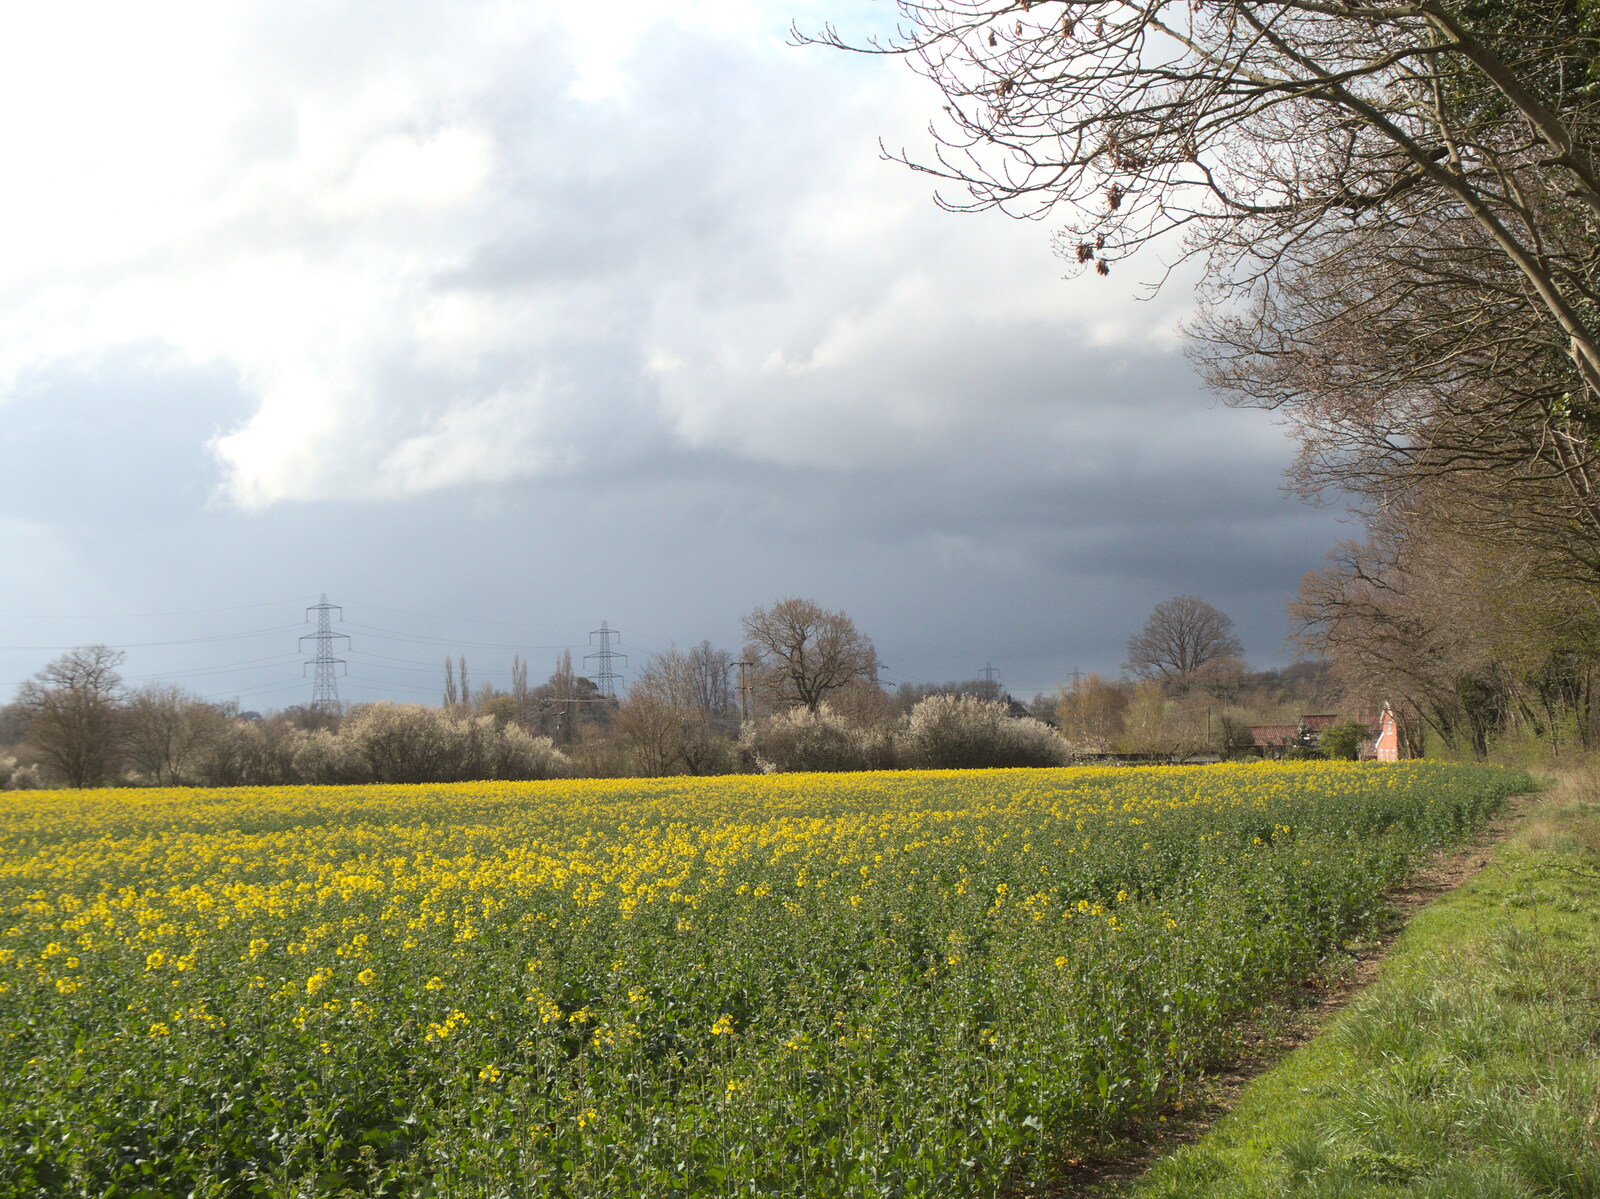 A field of oilseed on Thornham Road from Roadworks and Harry's Trampoline, Brome, Suffolk - 6th April 2021